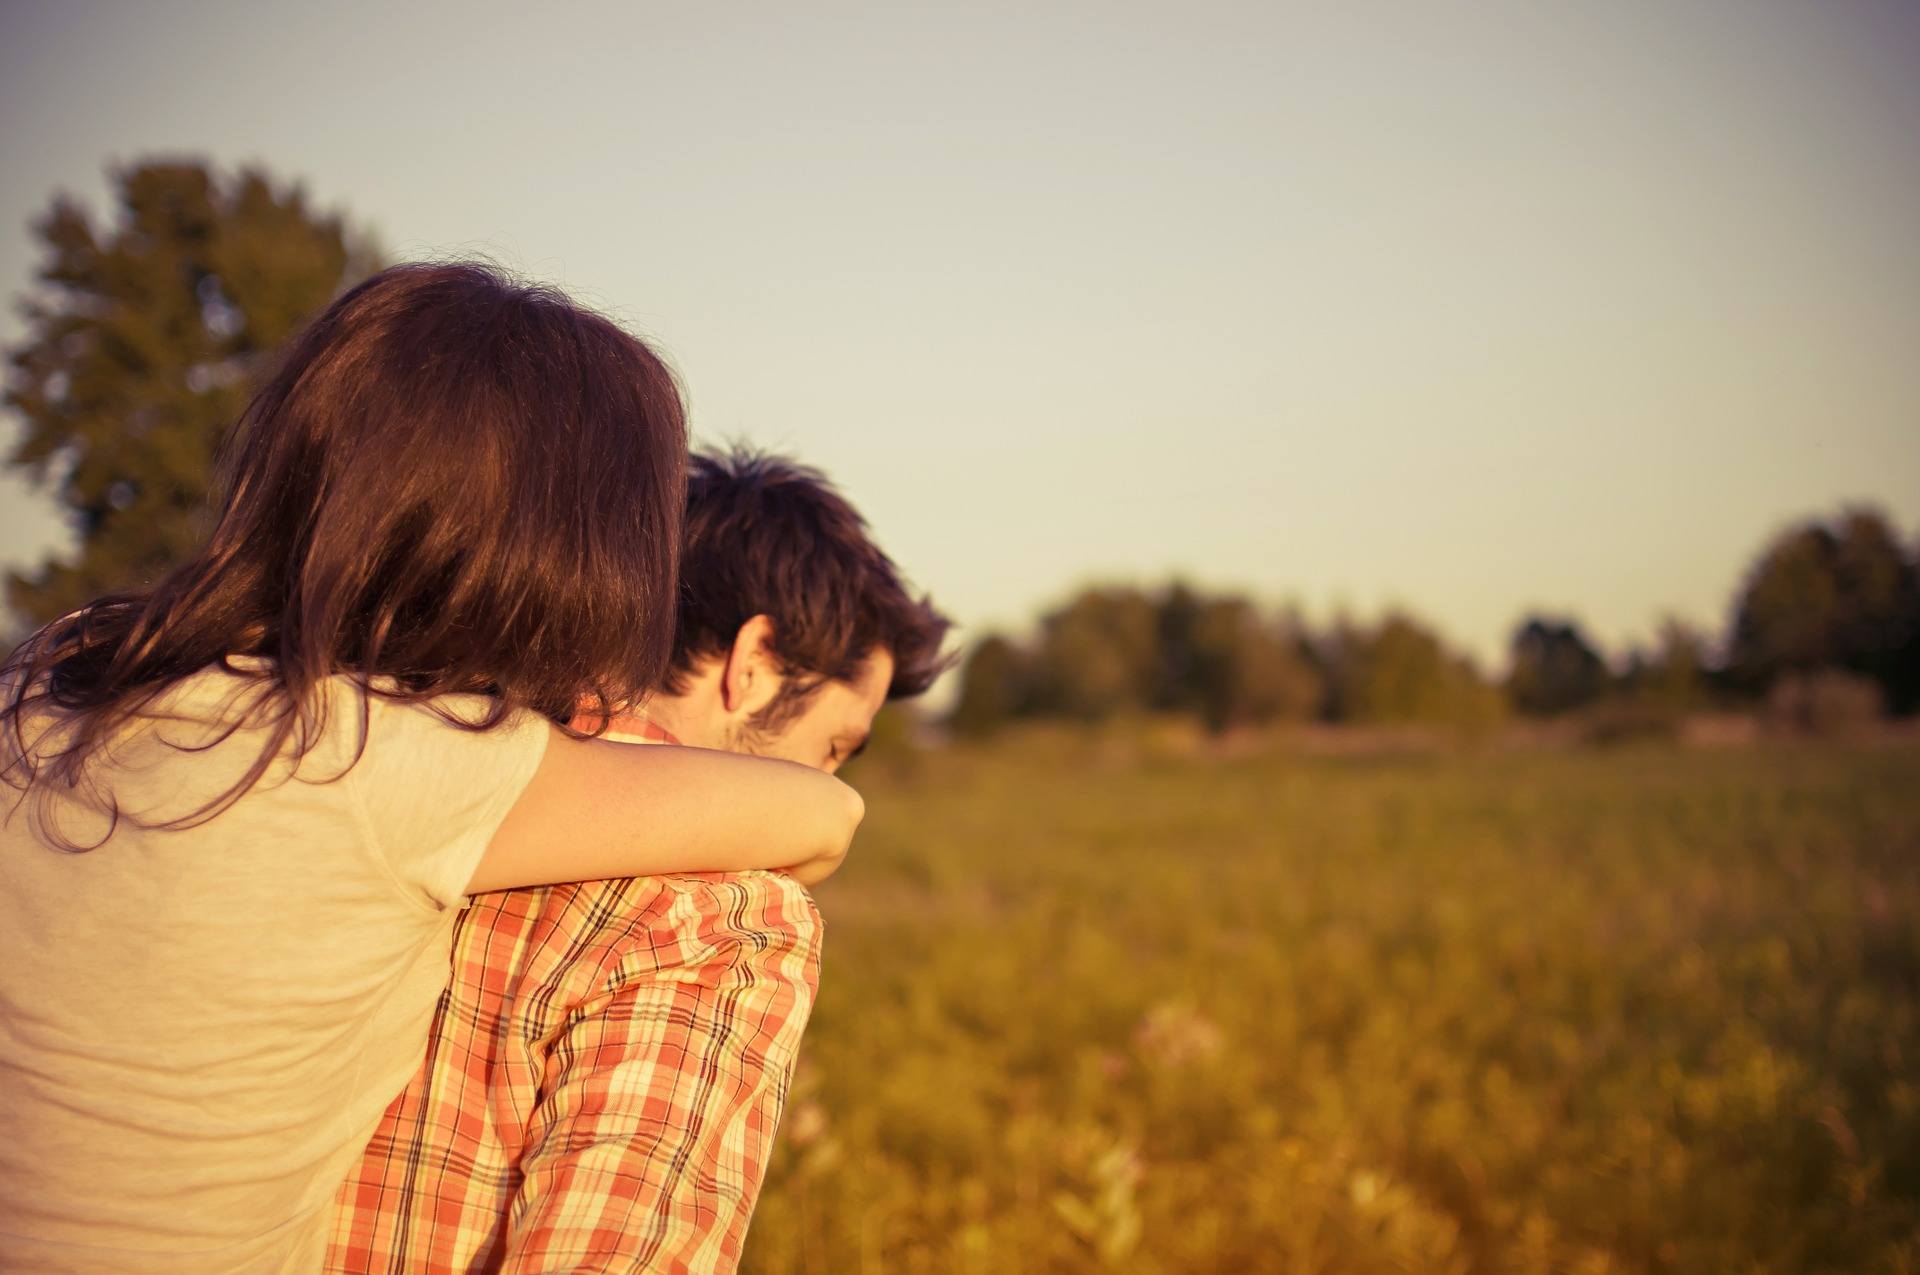 7 Things About Relationship I Wish I Could Tell My Younger Self